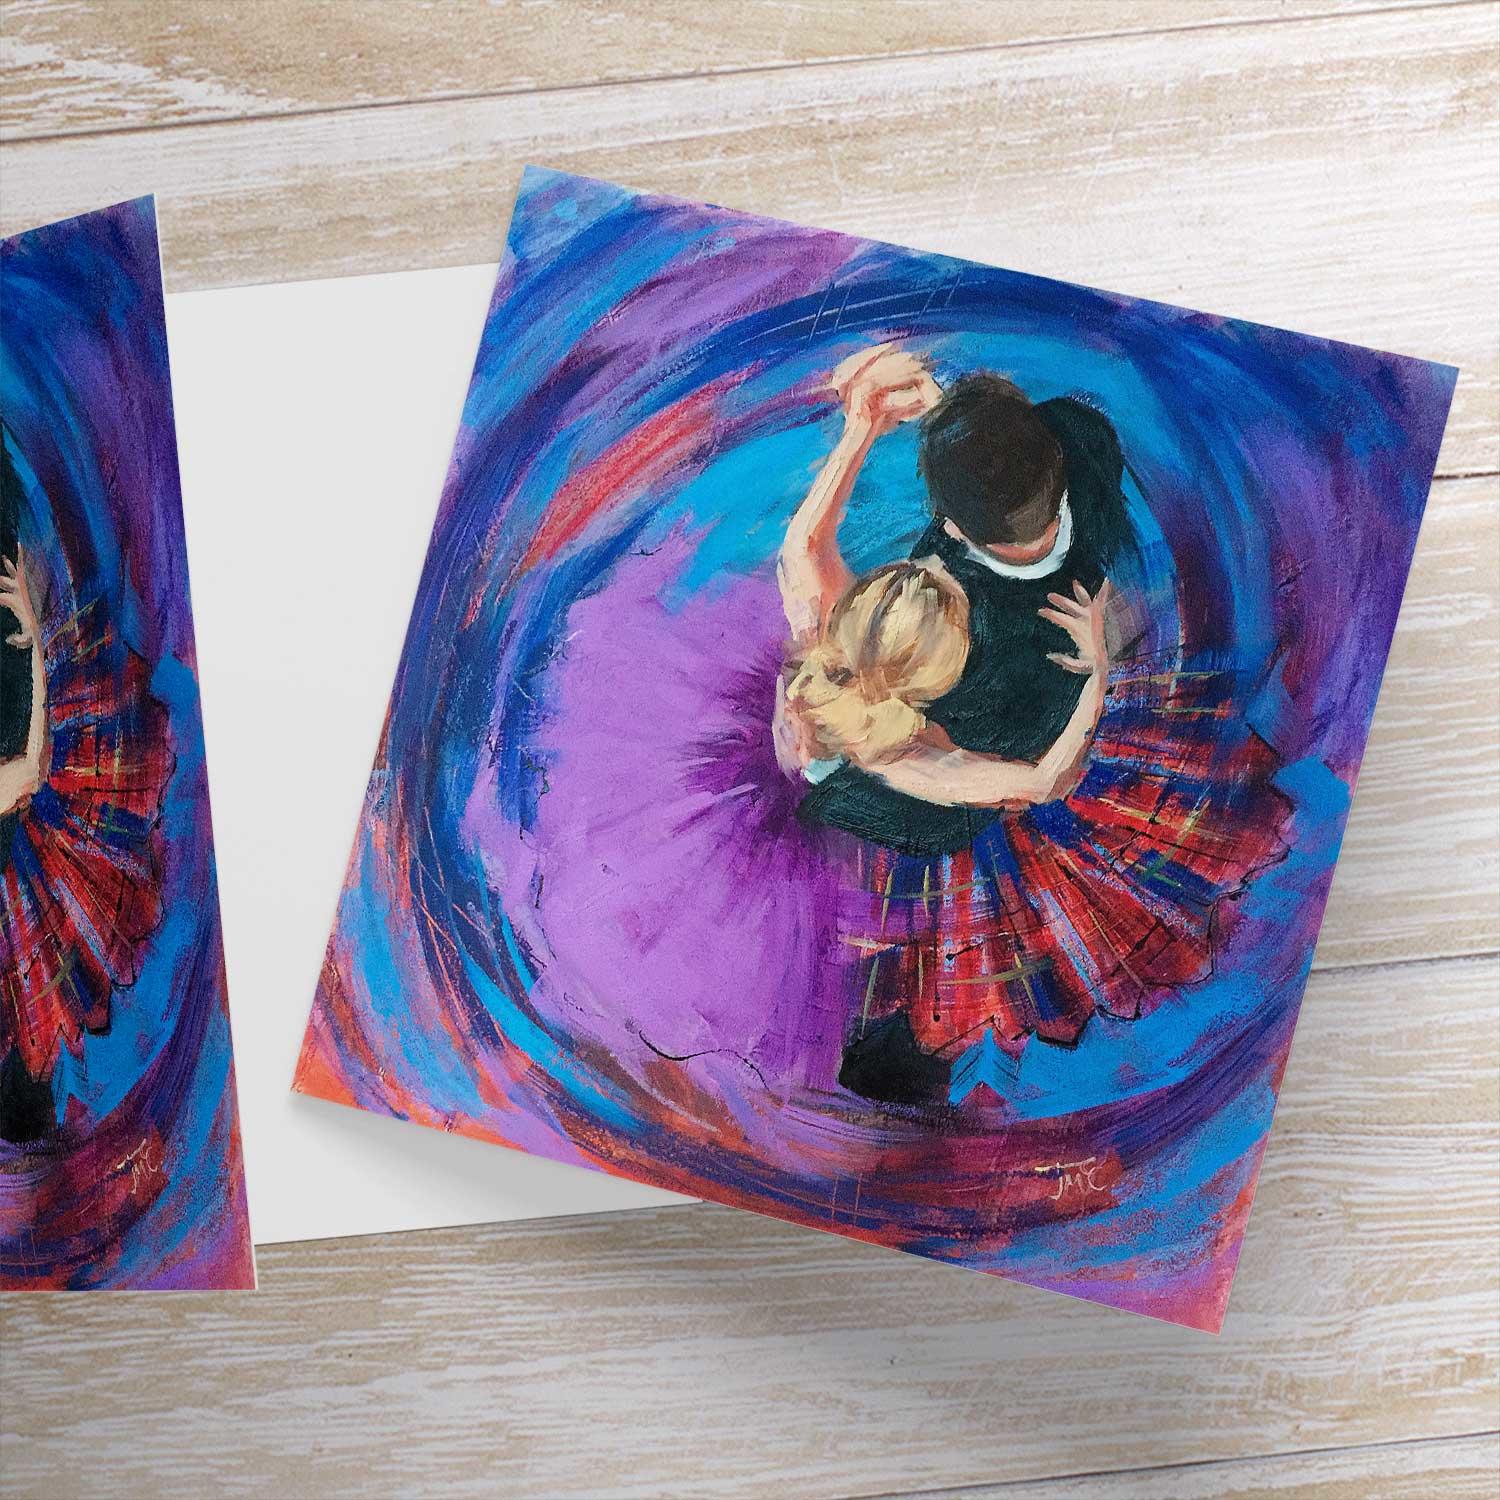 Above the Dance Greeting Card from an original painting by artist Janet McCrorie